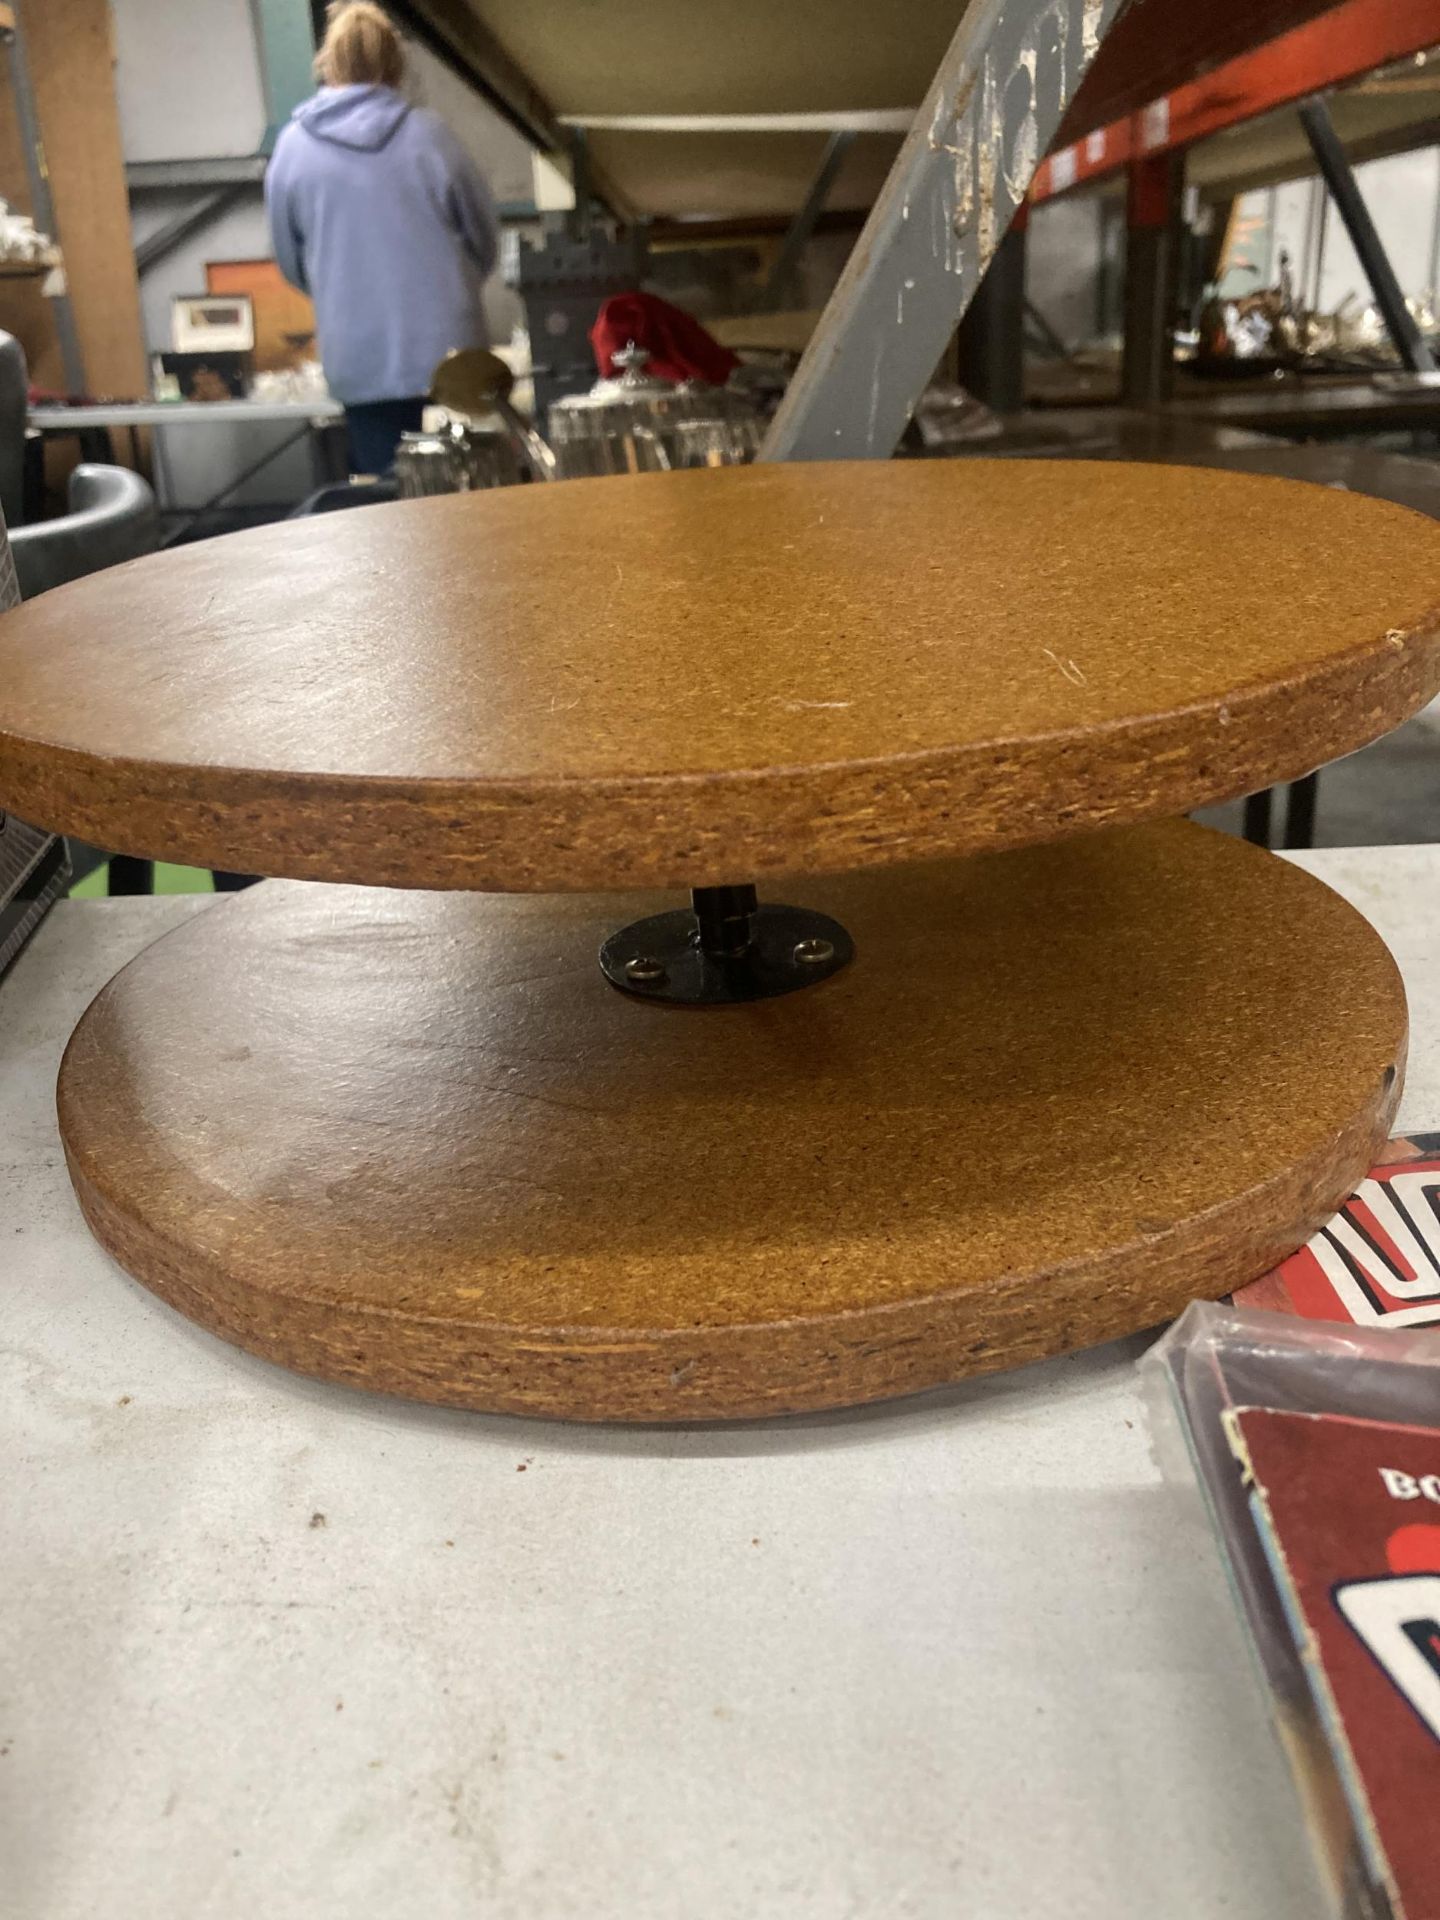 TWO WOODEN TURN TABLES POSSIBLY FOR CAKE DECORATING - Image 2 of 3